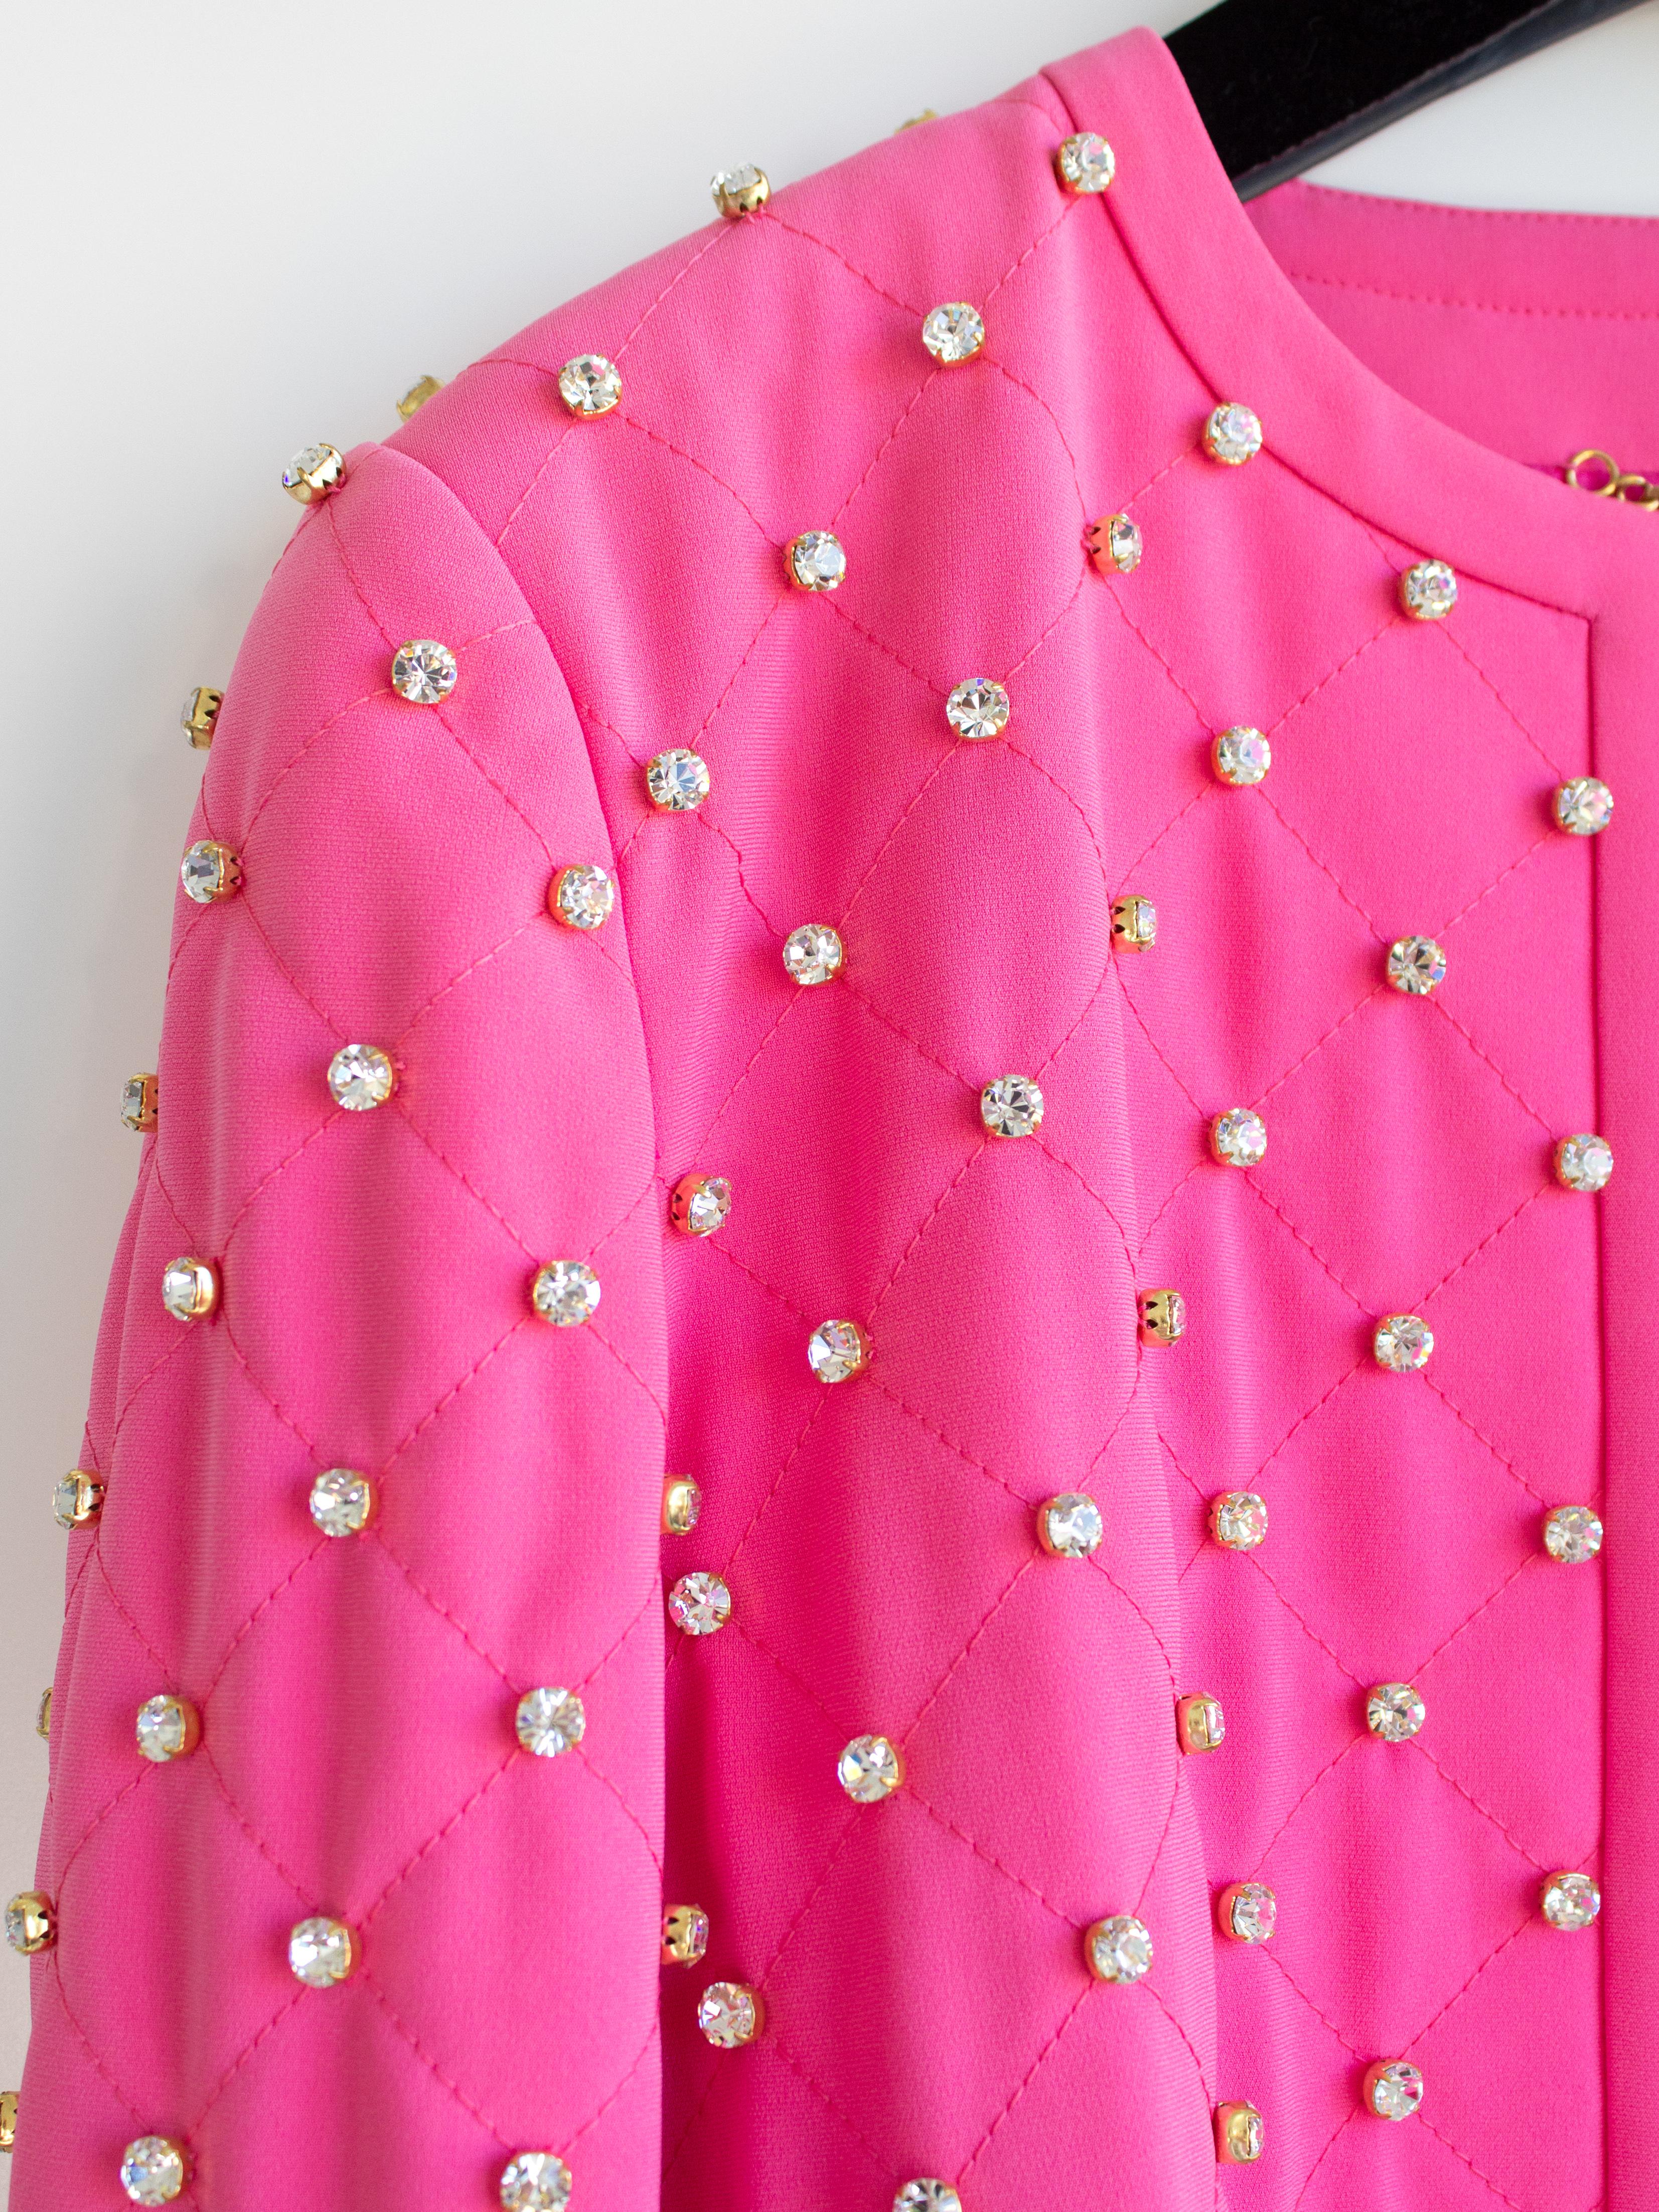 Moschino Couture S/S 2015 Barbie Crystal Embellished Rhinestone Pink Jacket For Sale 6